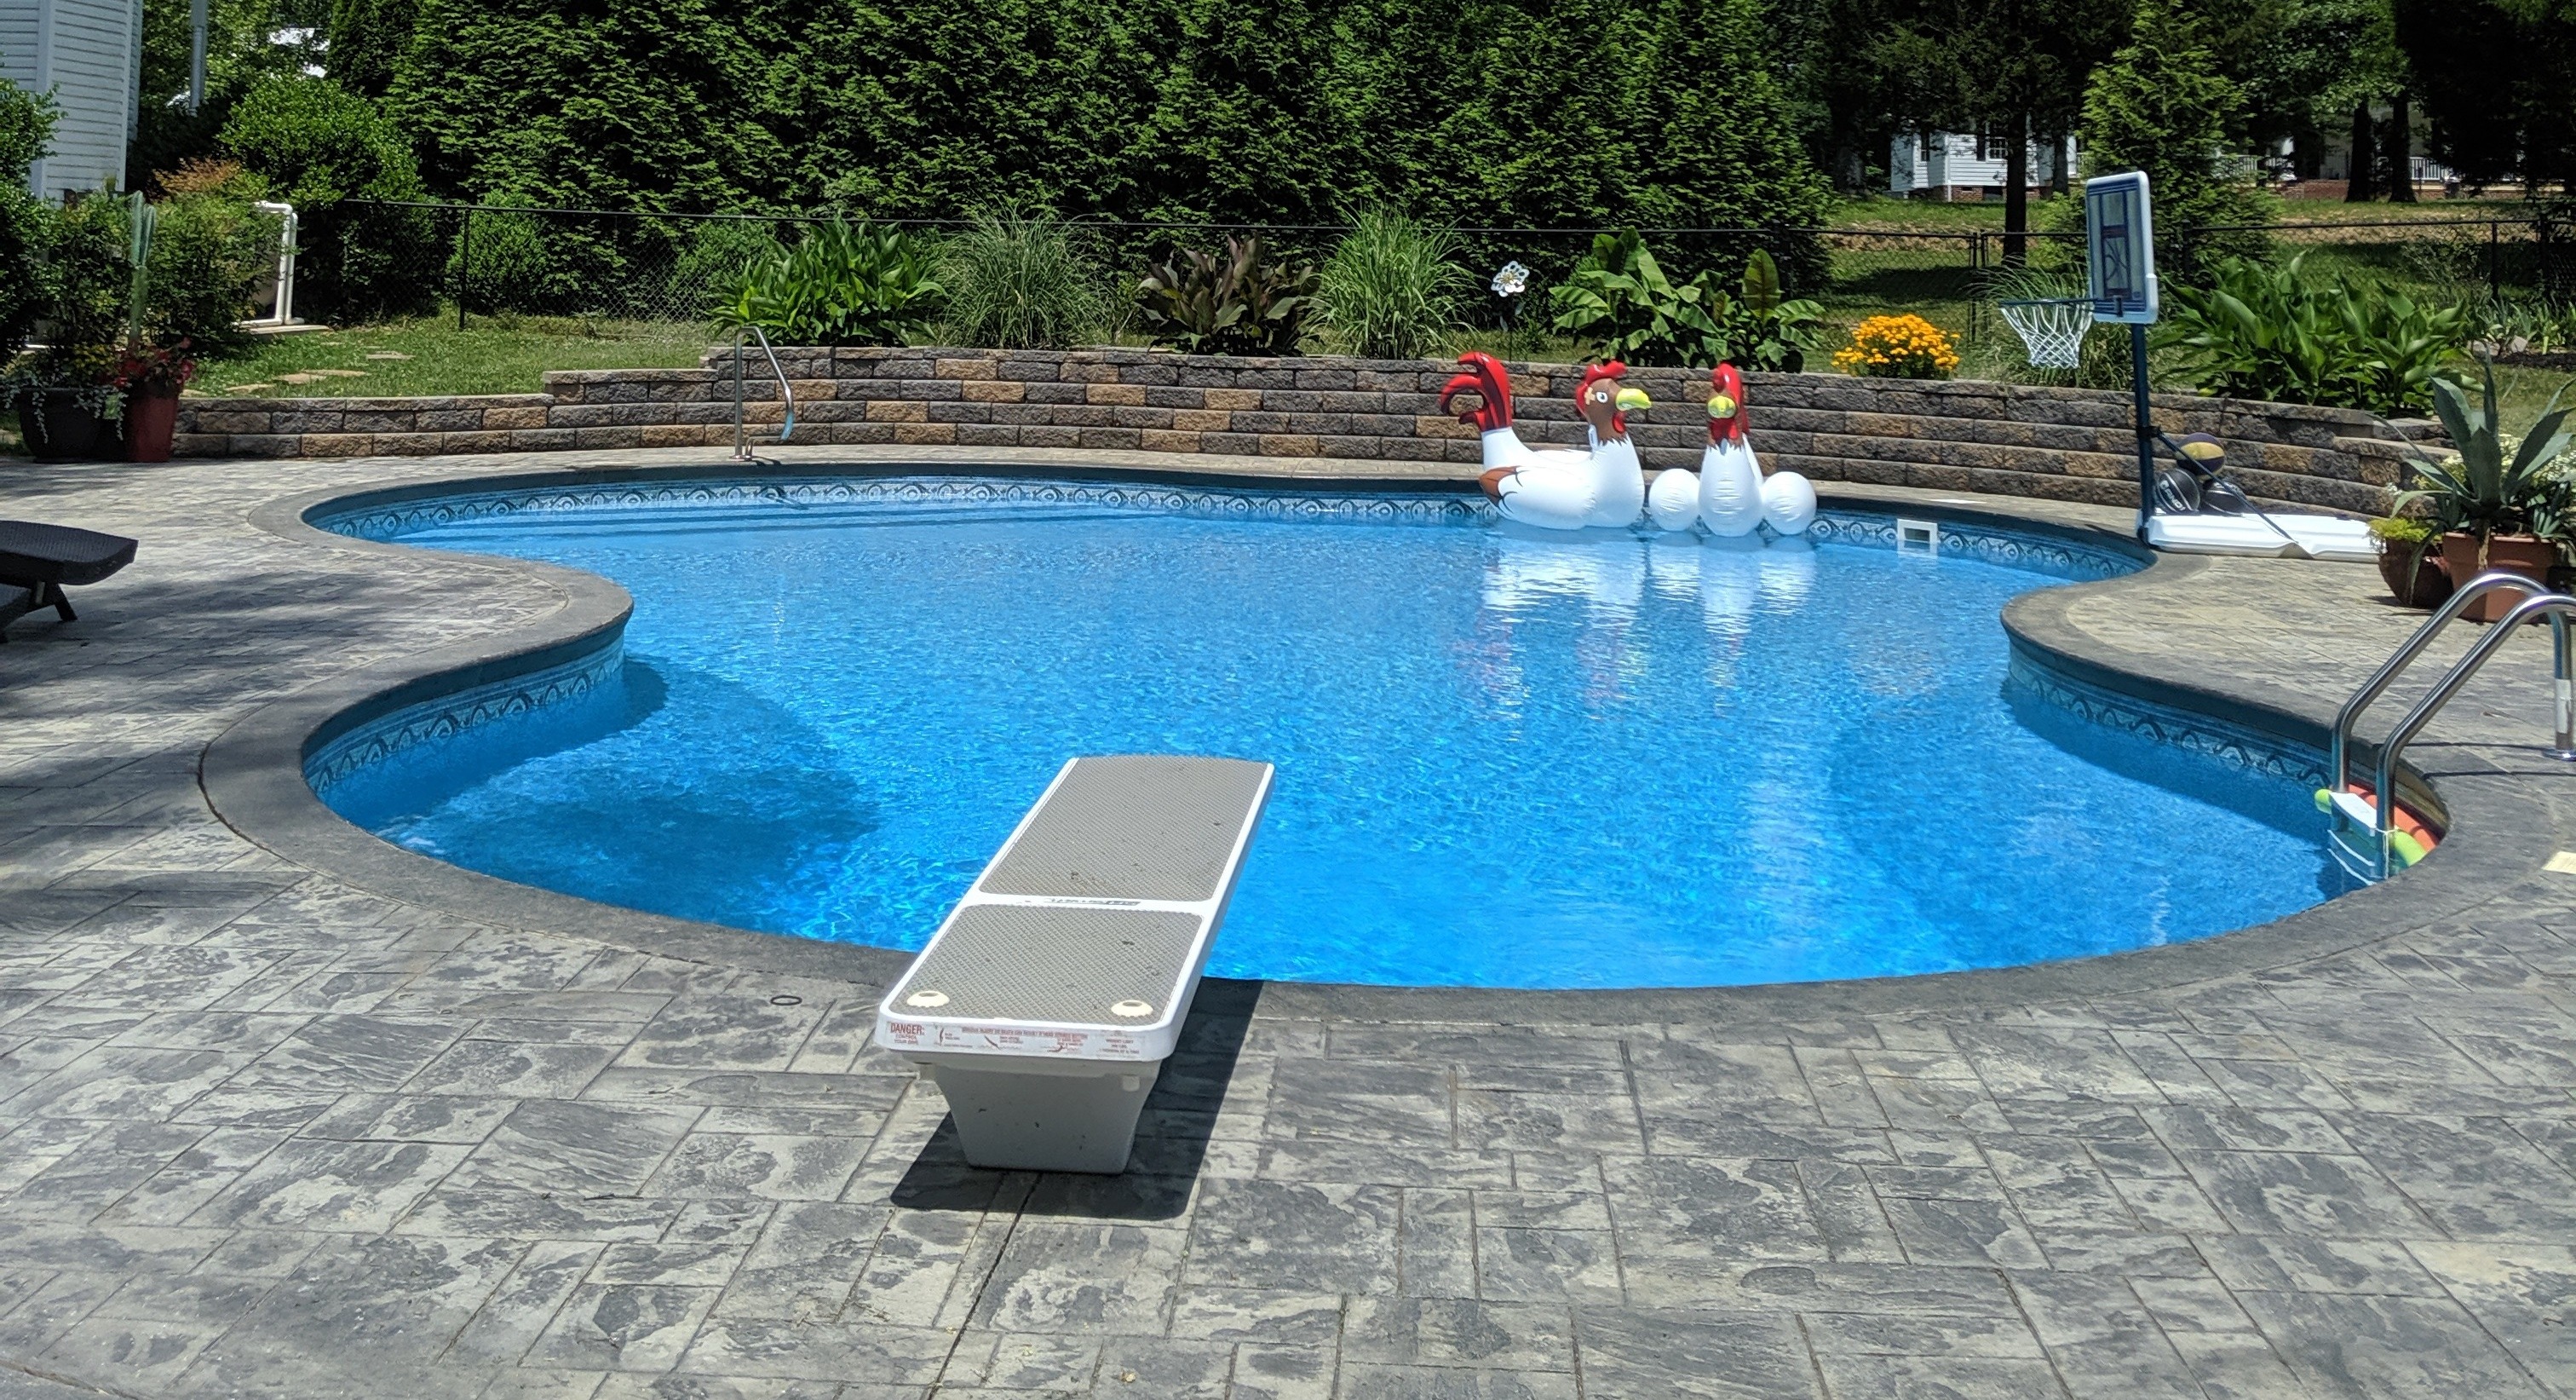 How To Safely Design A Diving Board Pool, Inground Pool Diving Board Basement